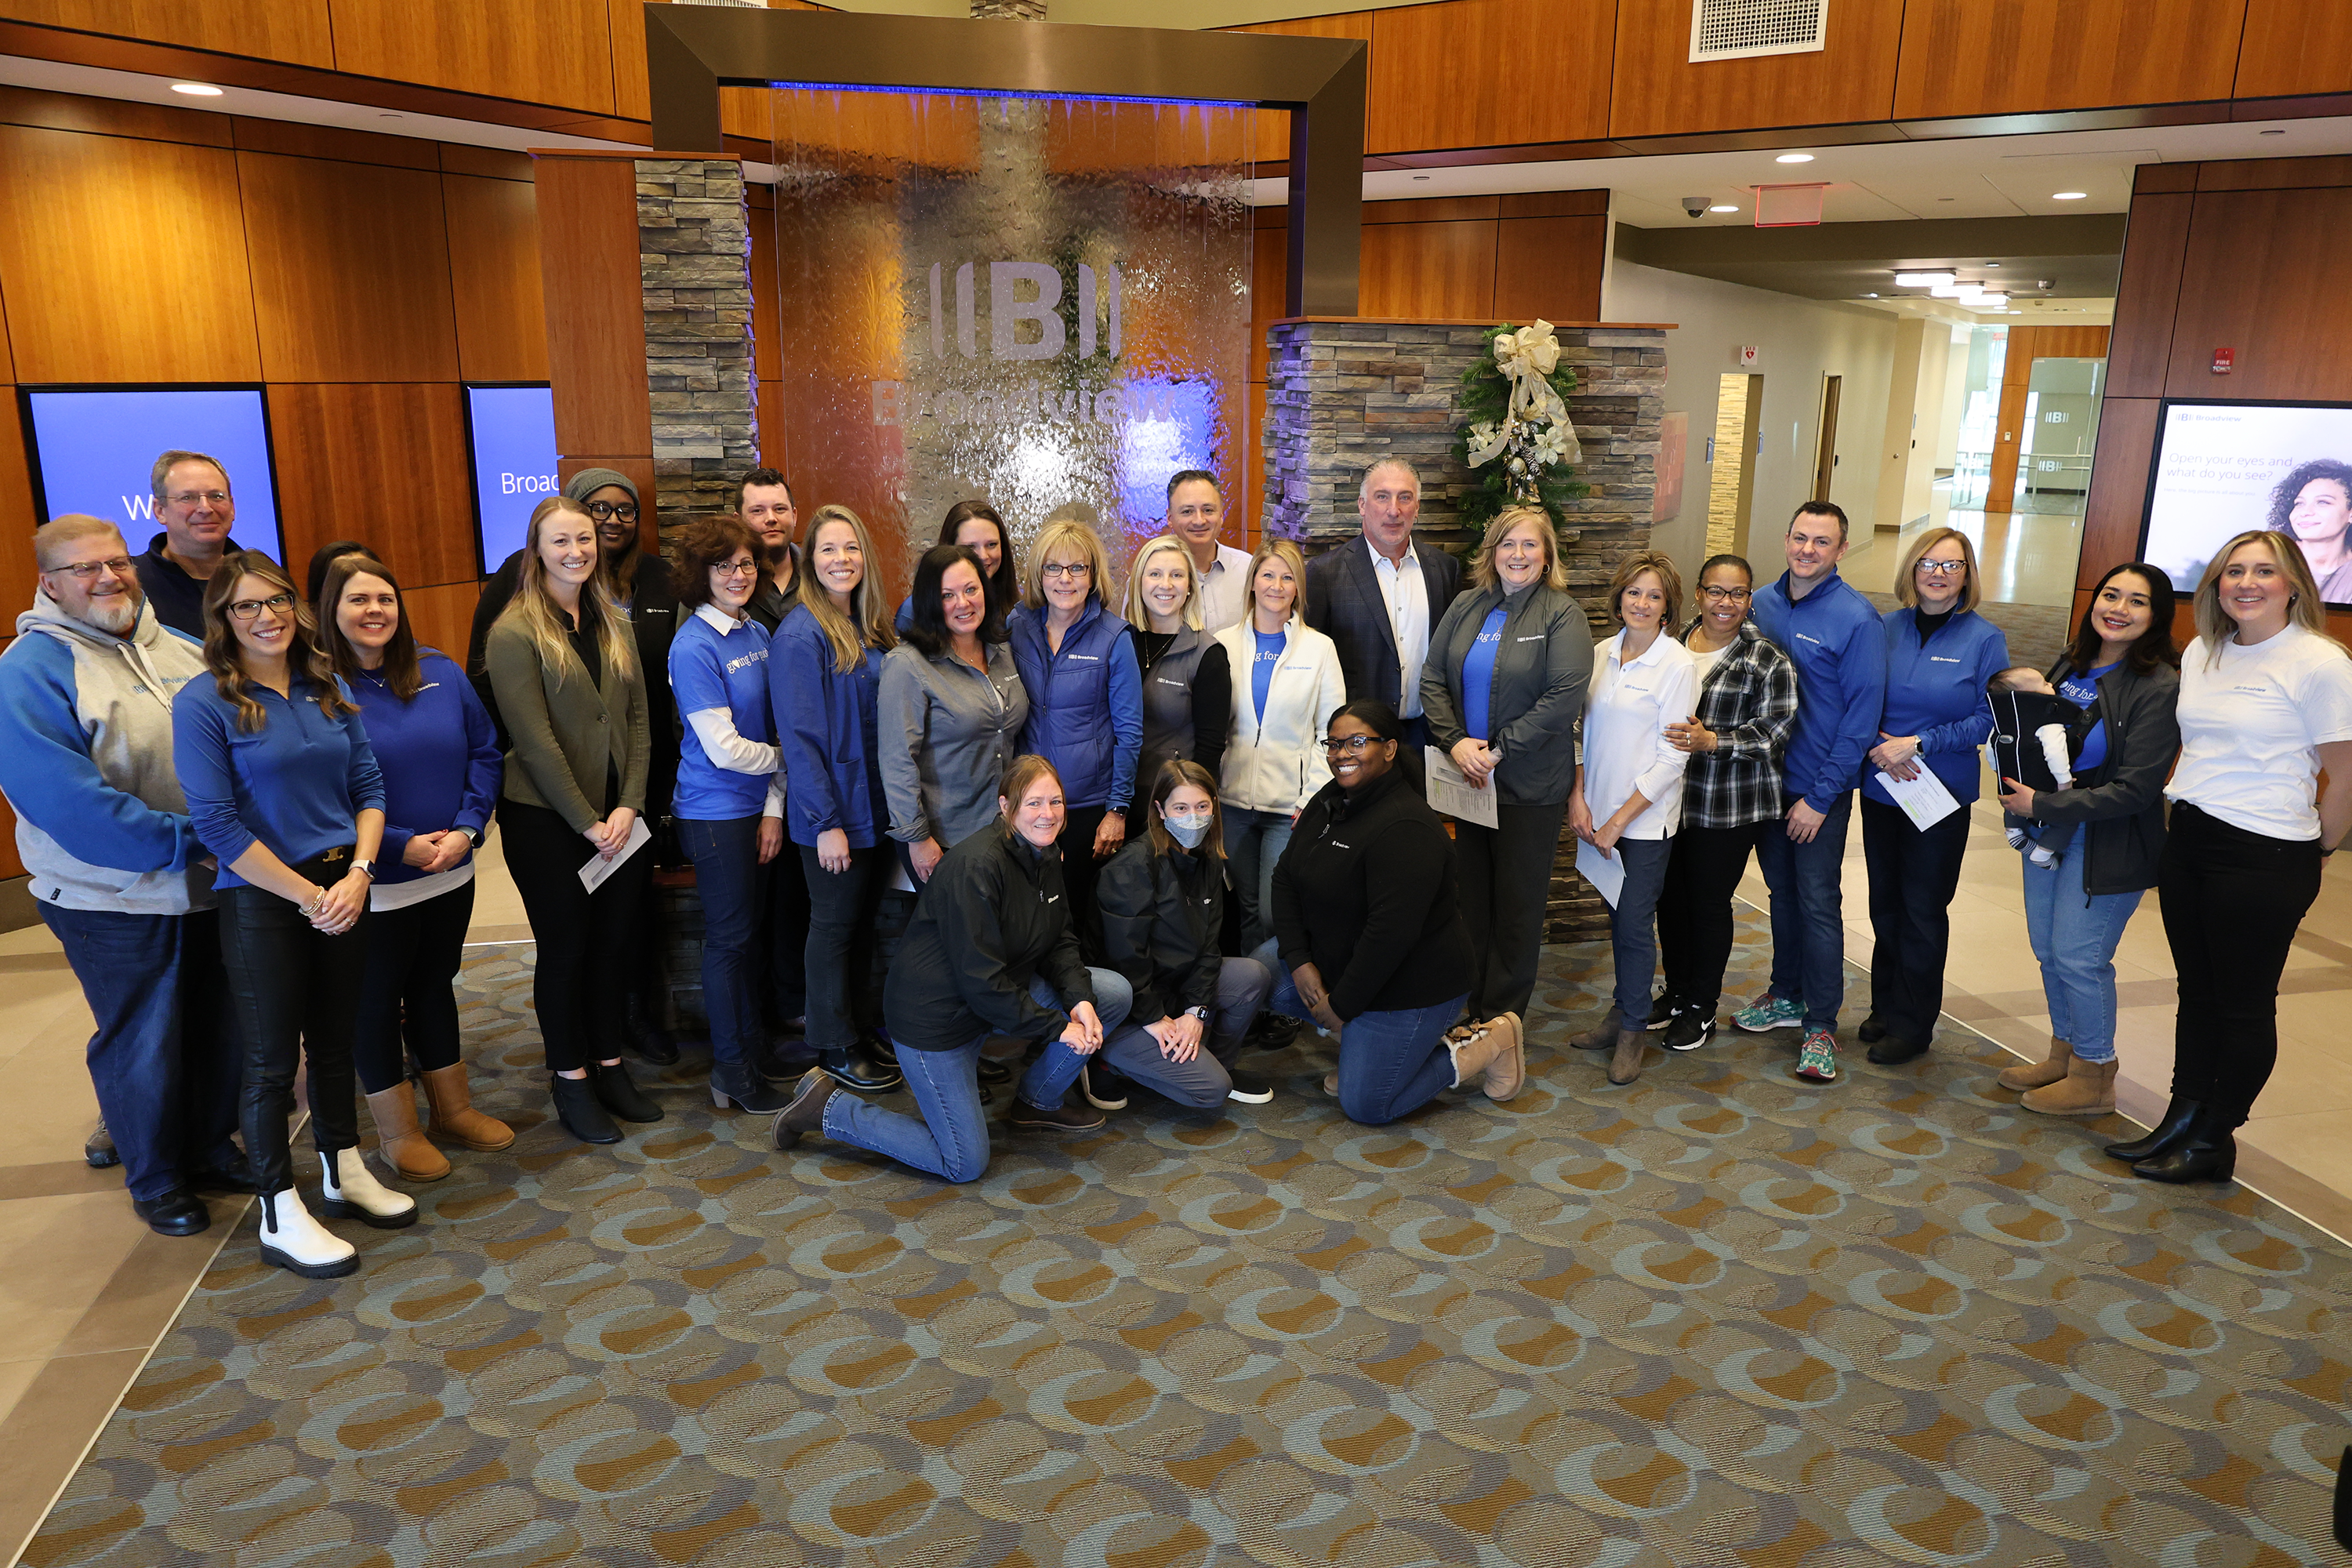 Large group of Broadview employees posed together